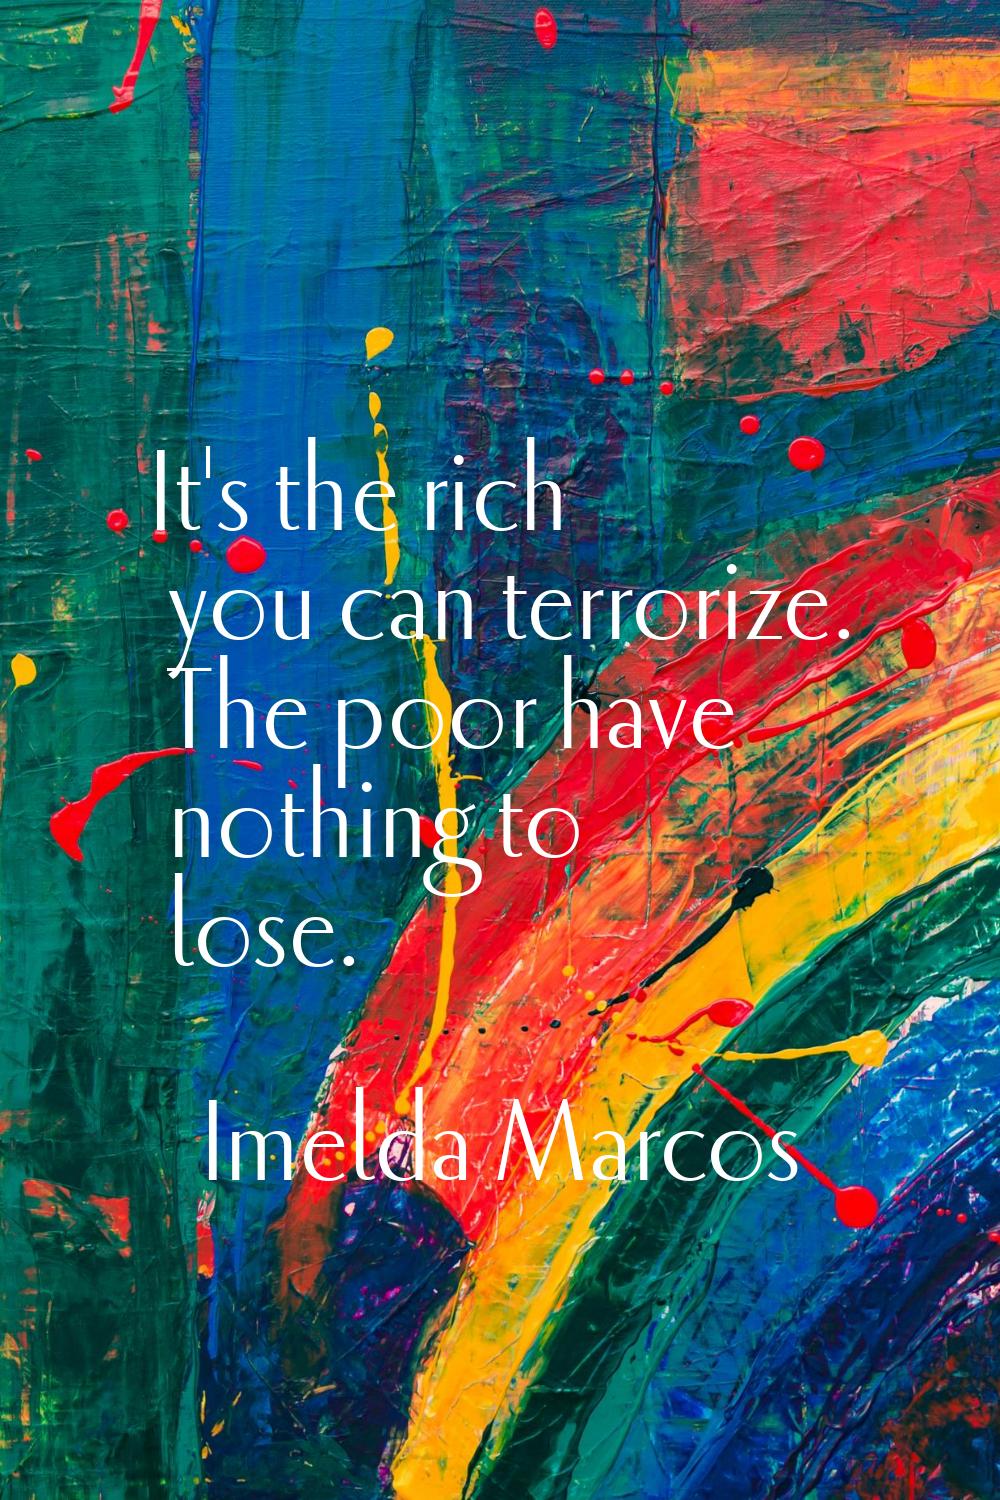 It's the rich you can terrorize. The poor have nothing to lose.